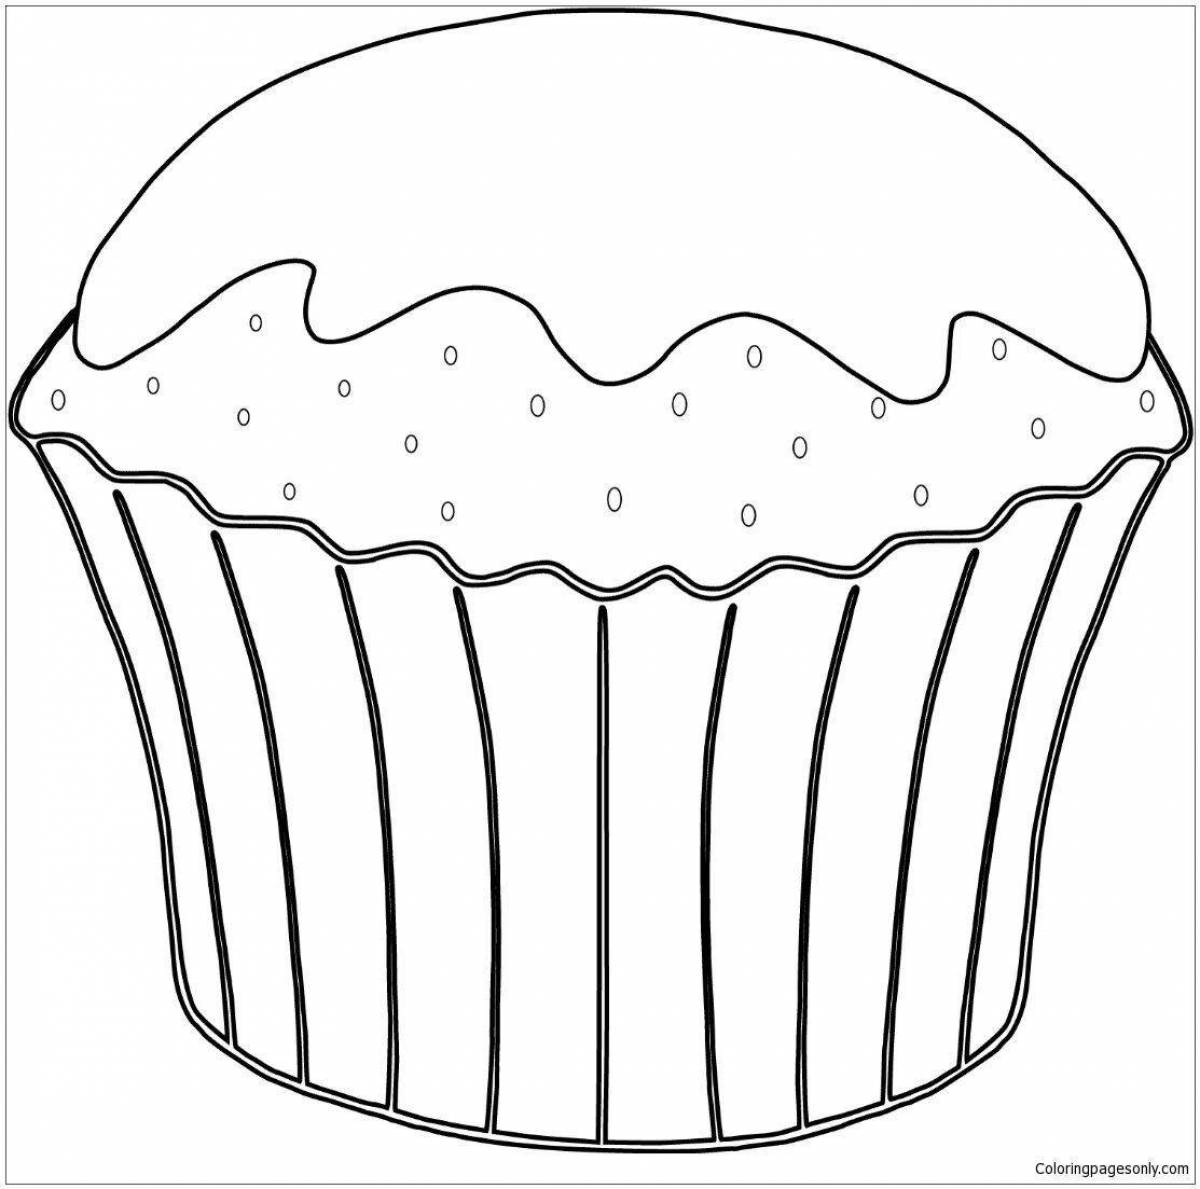 Scented dessert coloring page